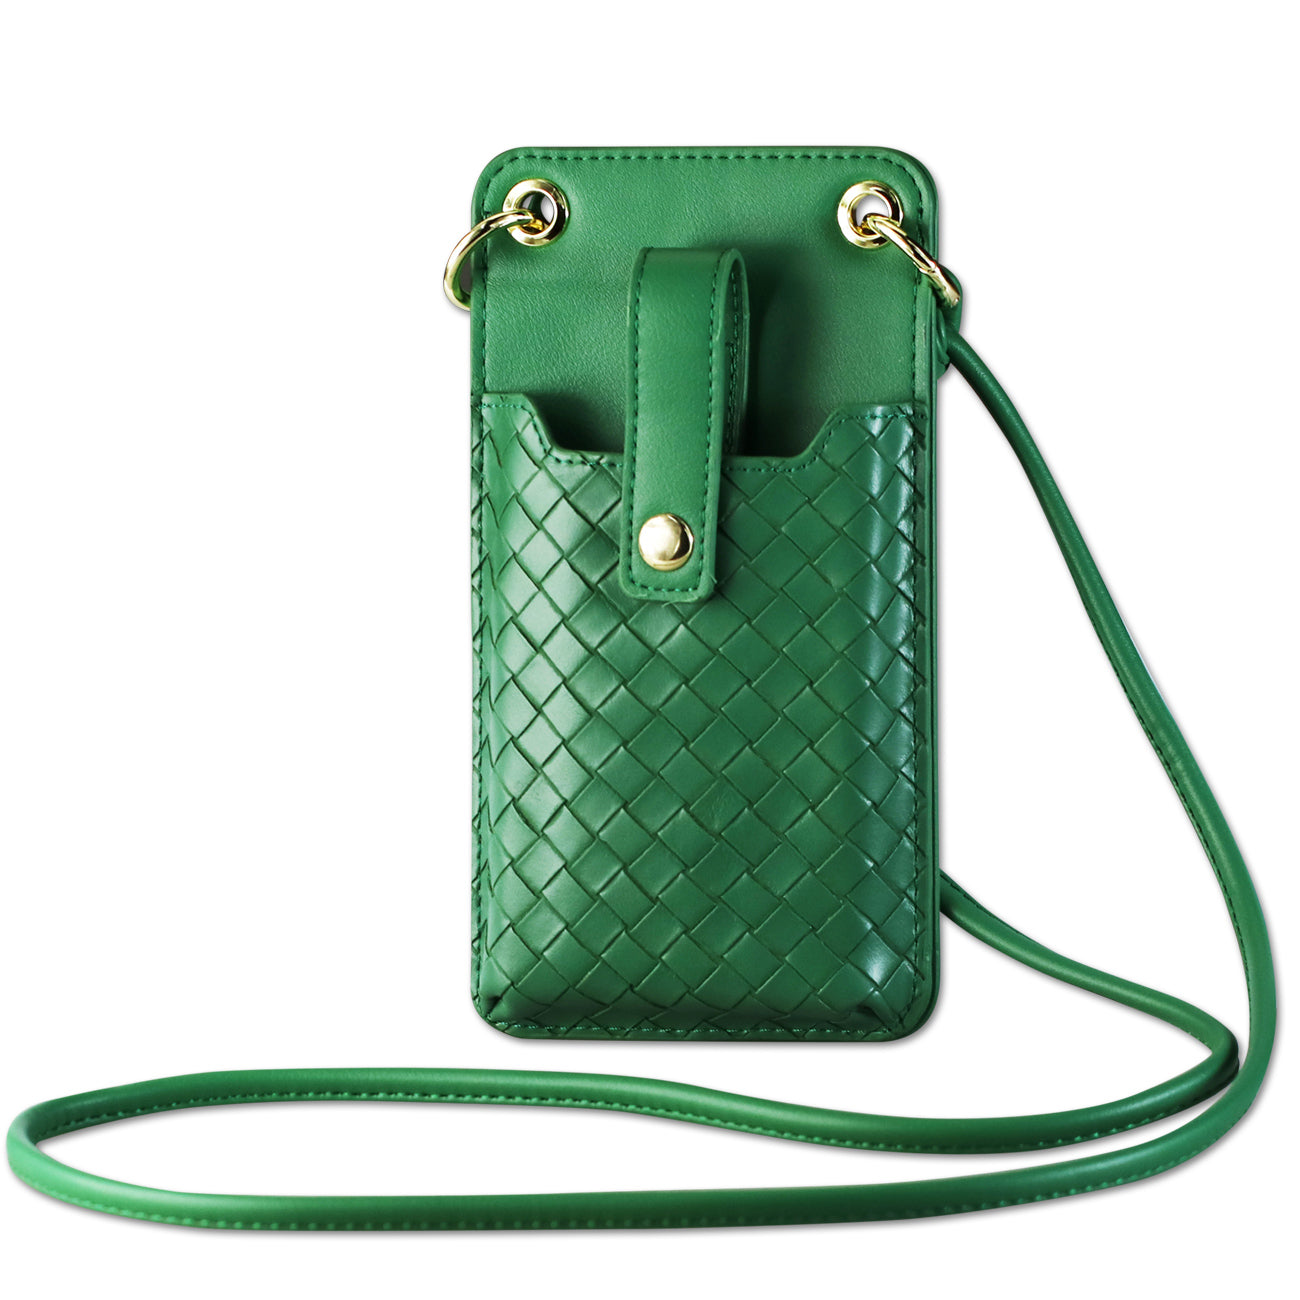 Reiko Leather Crossbody Phone Wallet Large Purse In Green